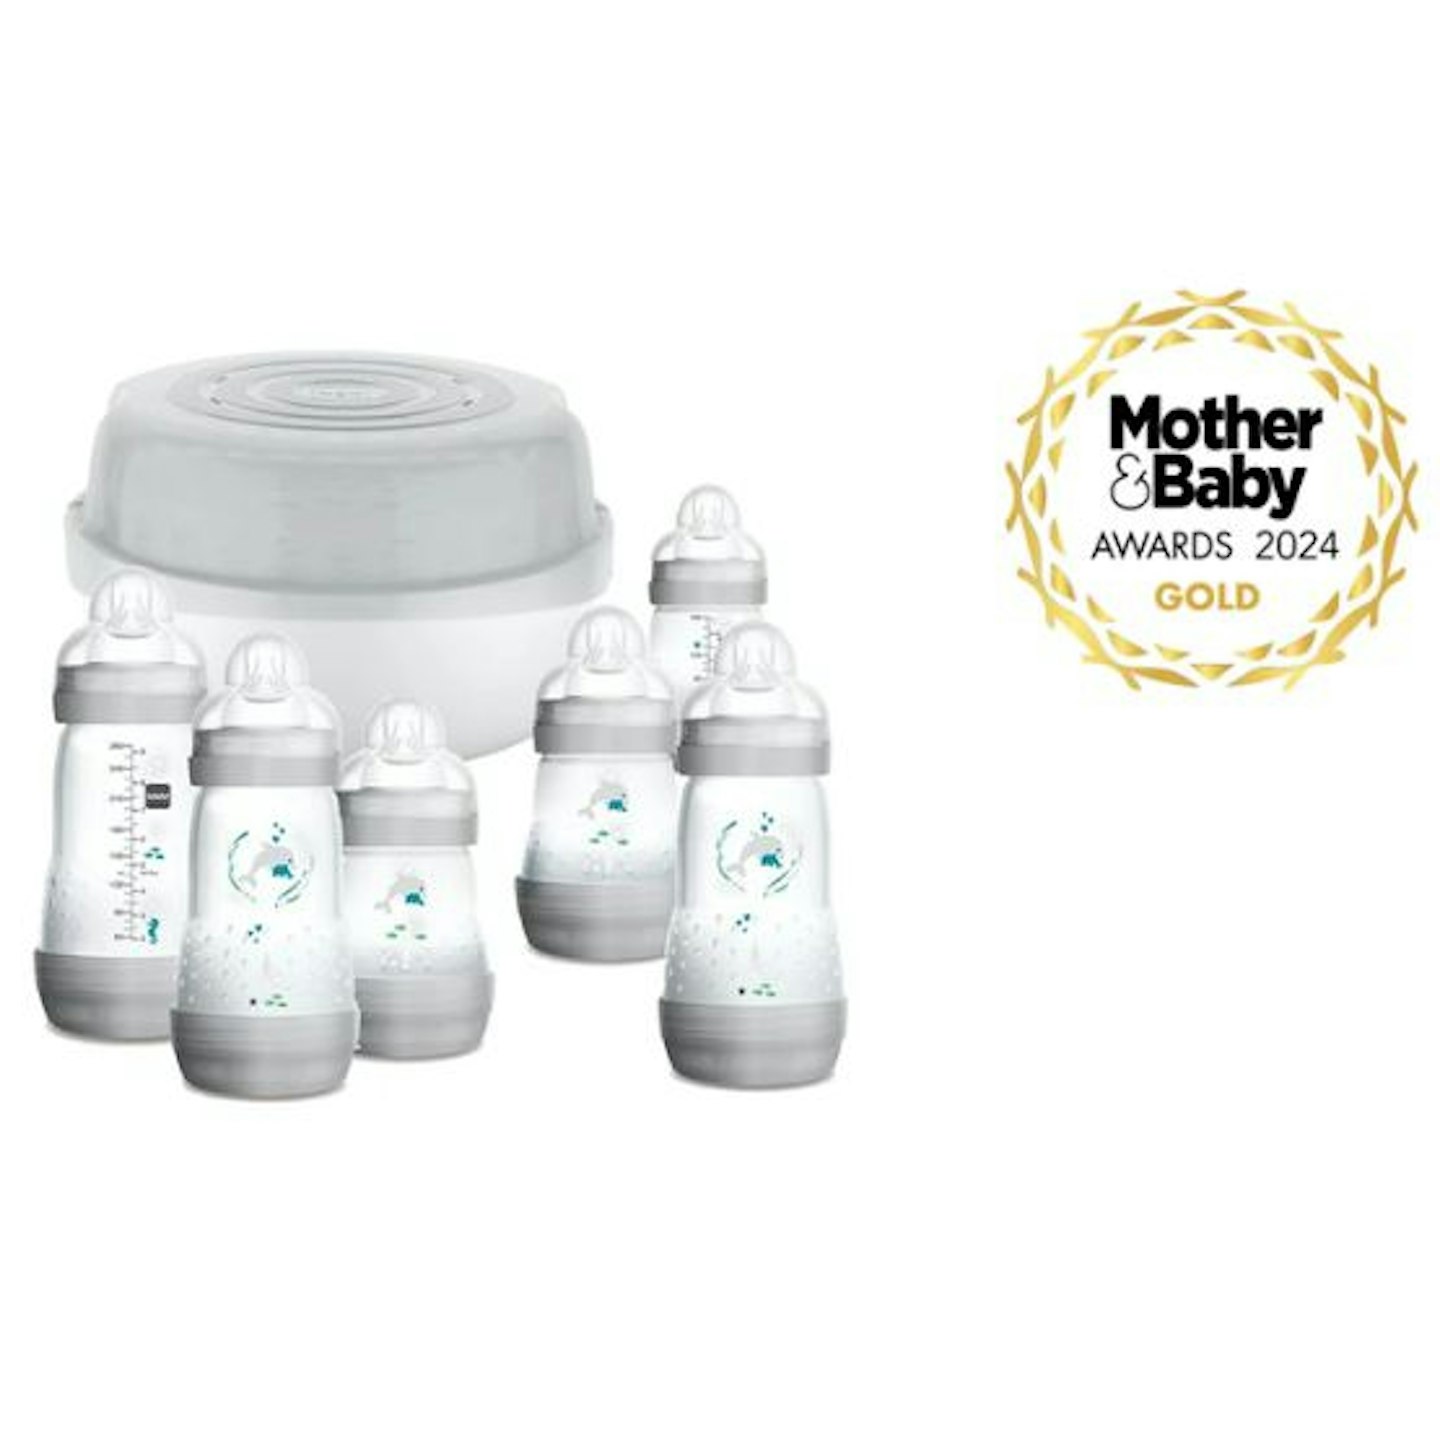 10 of the best sterilisers for baby bottles and breast pumps